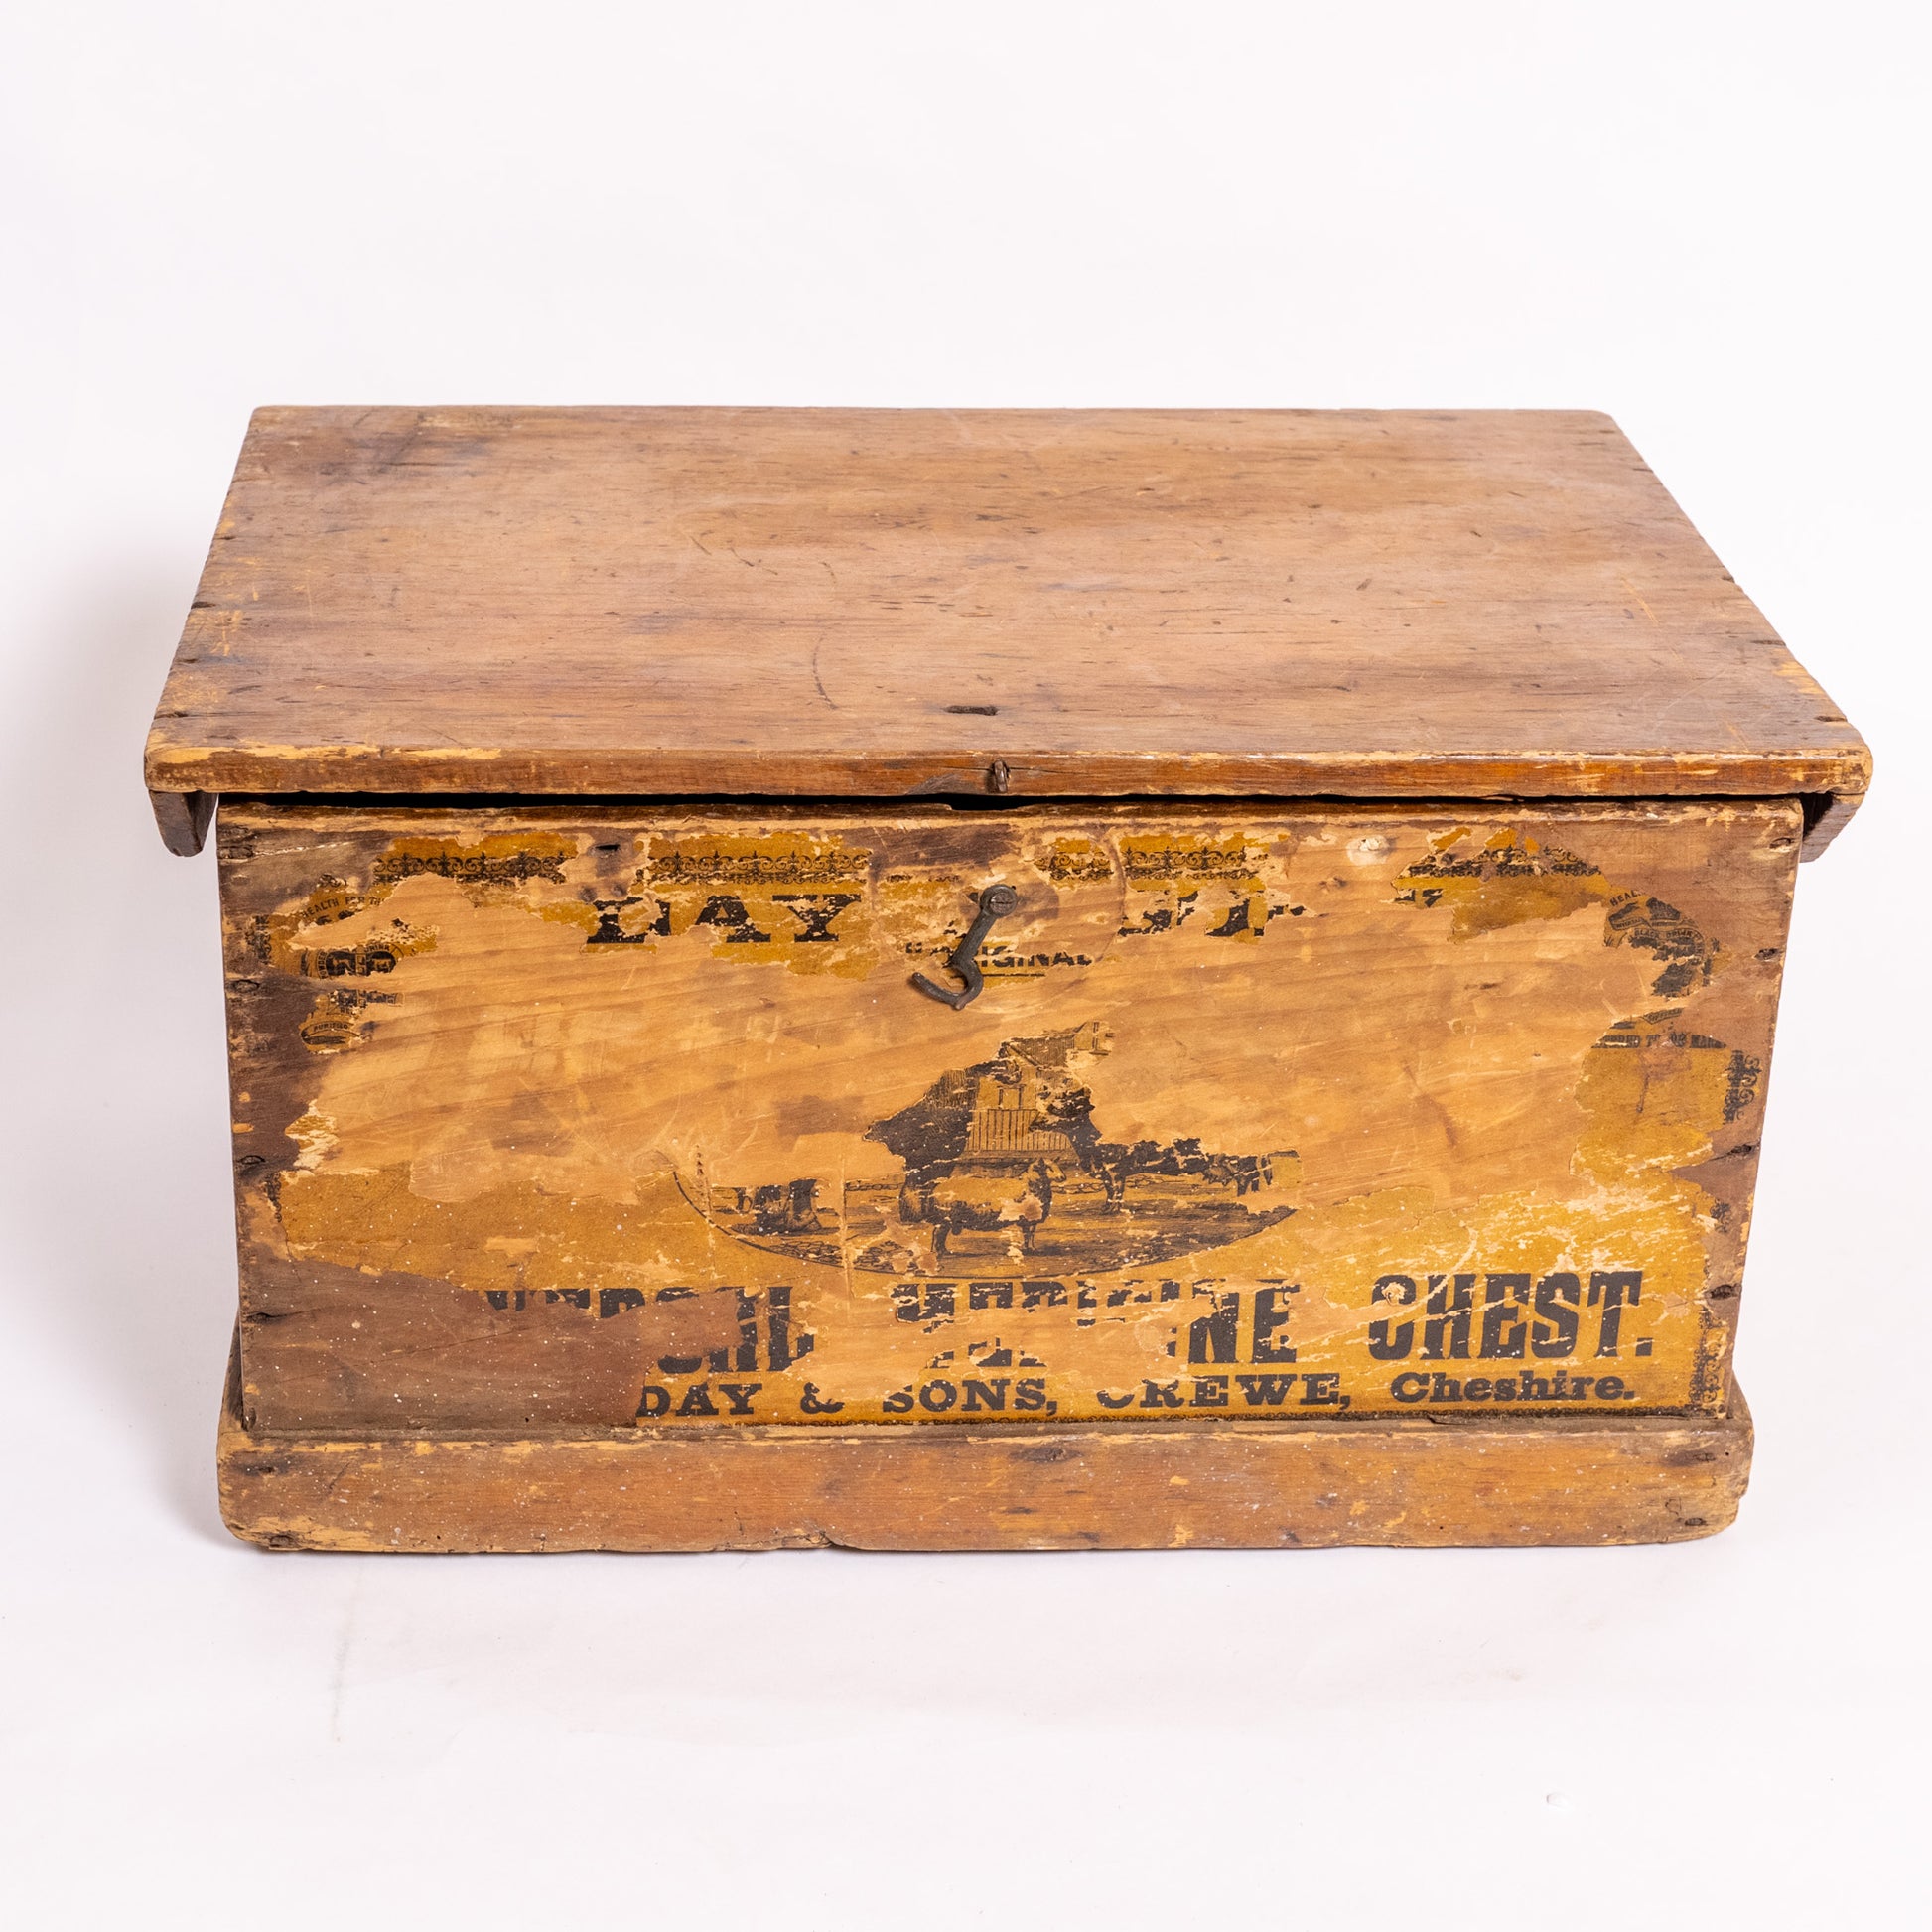 Day & Sons Vintage Universal Medical Chest